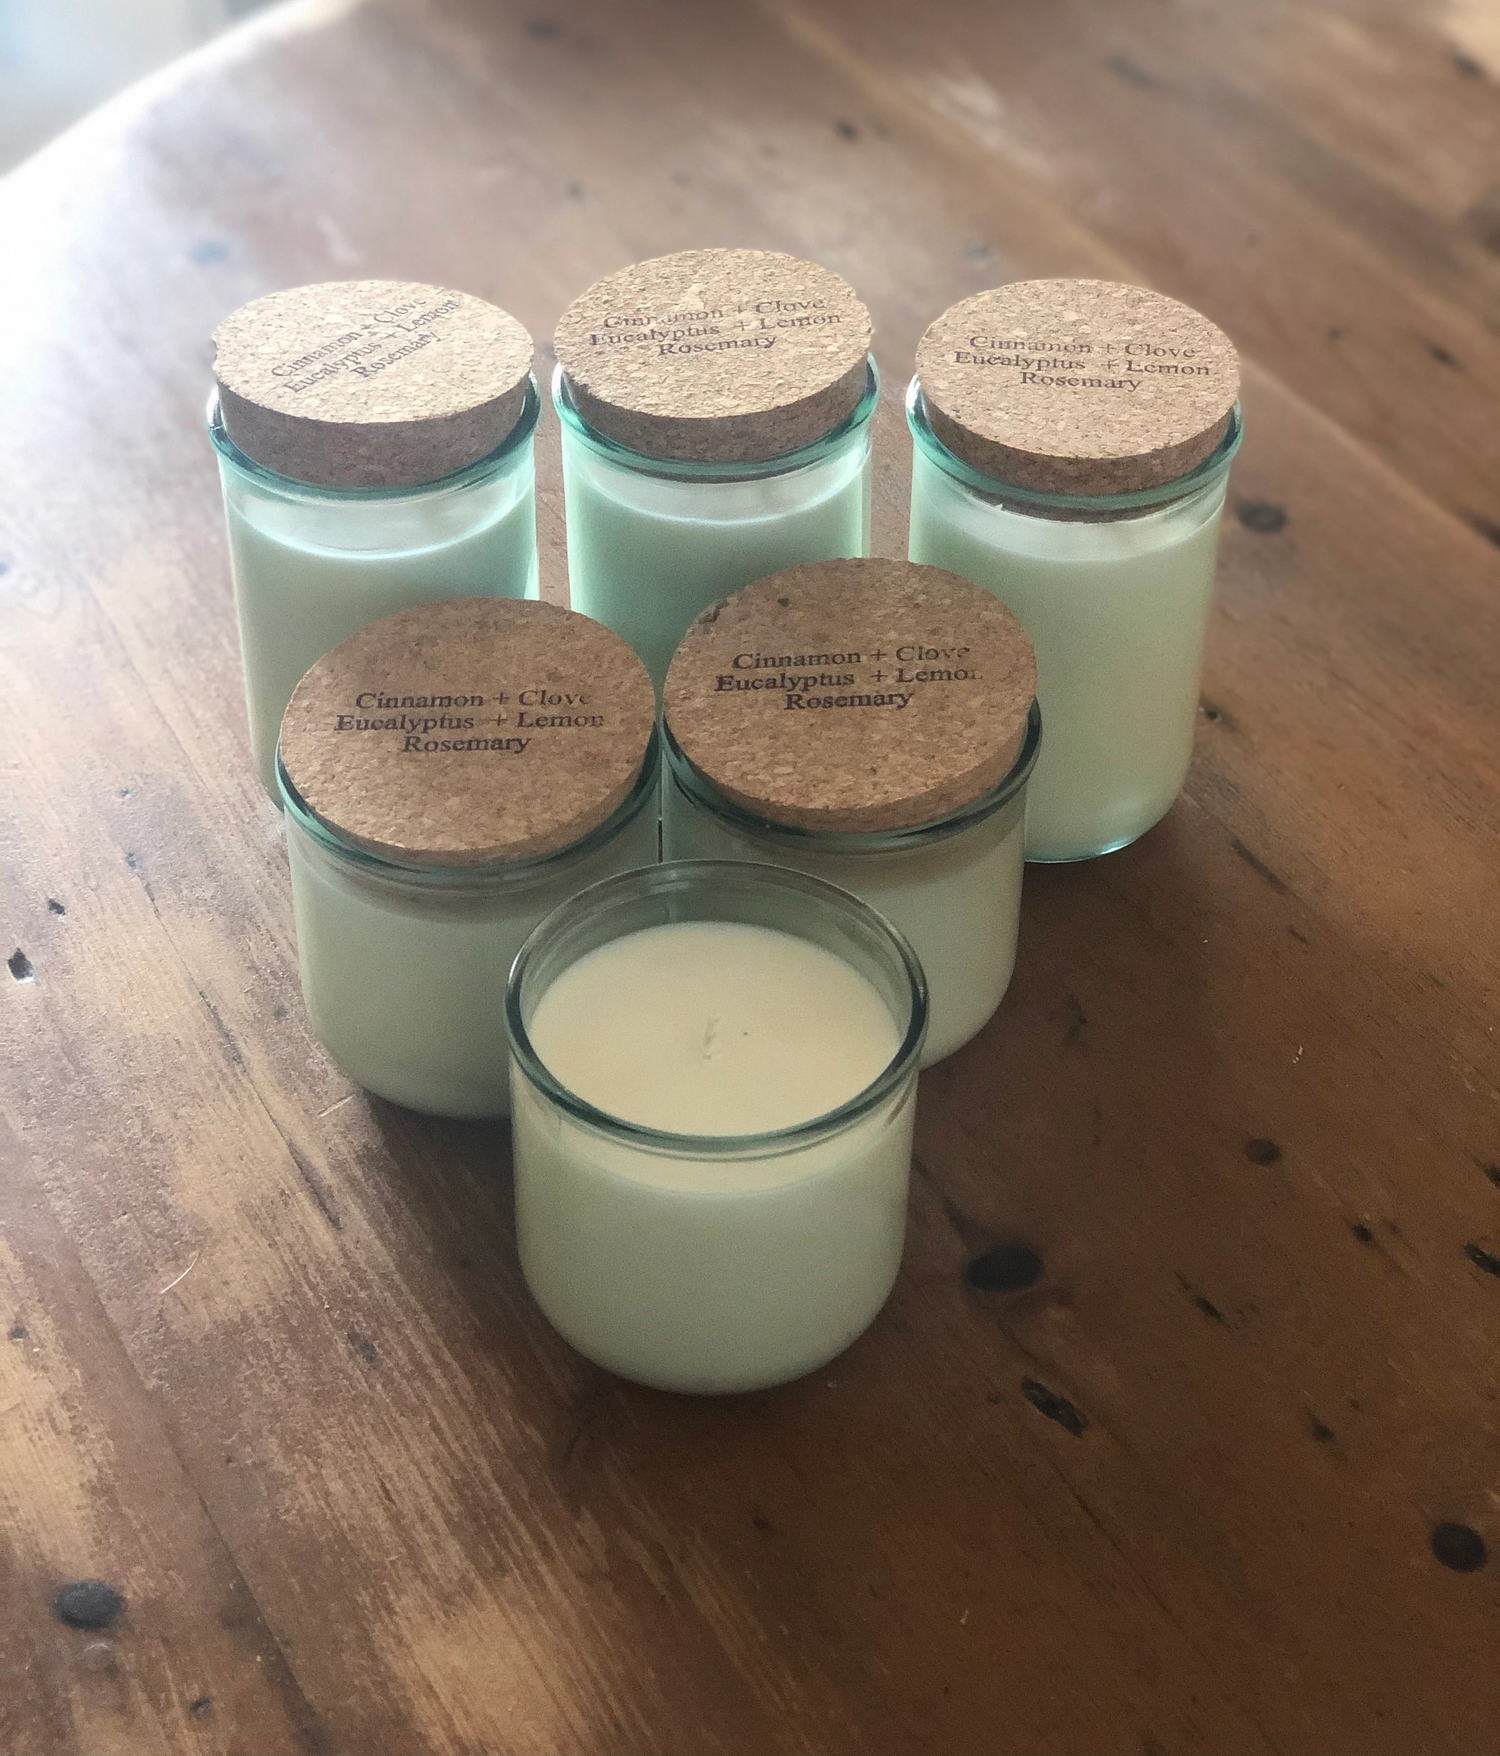 Lavender + Ylang Ylang Therapeutic Soy Candle